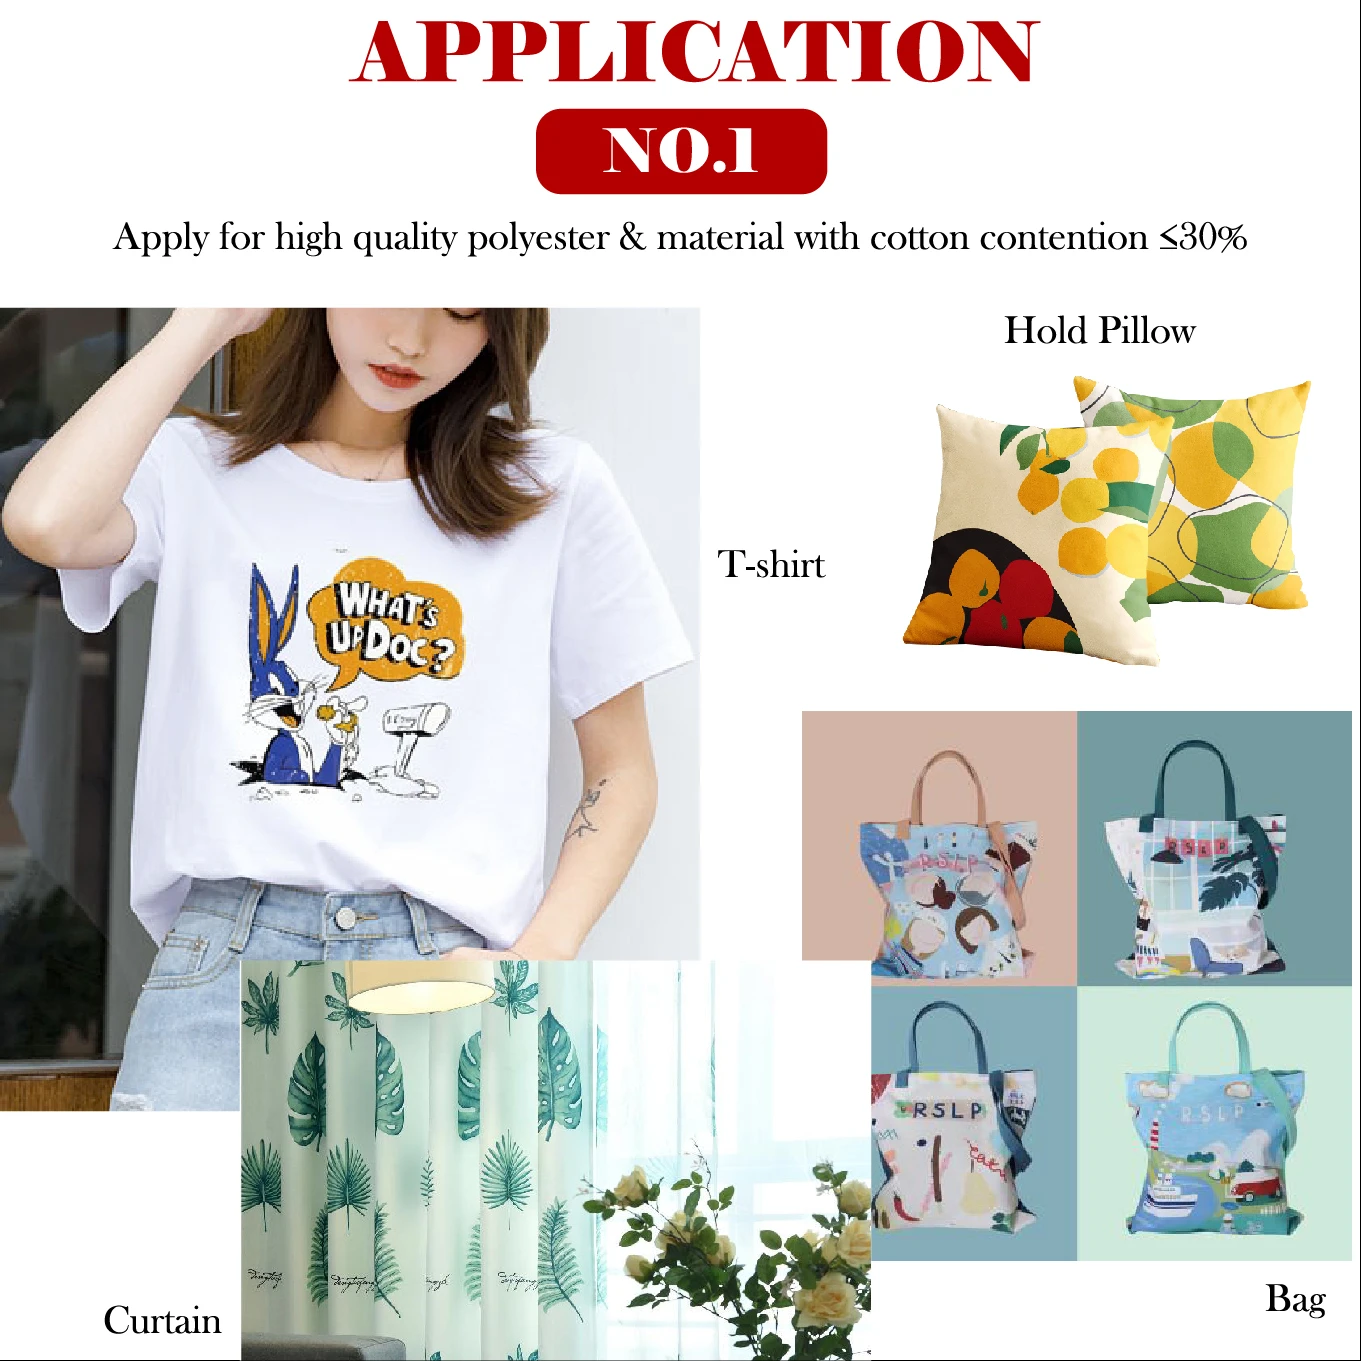 Inkjet printing sublimation transfer paper heat transfer paper fast dry sublimation inkjet transfer paper for textiles